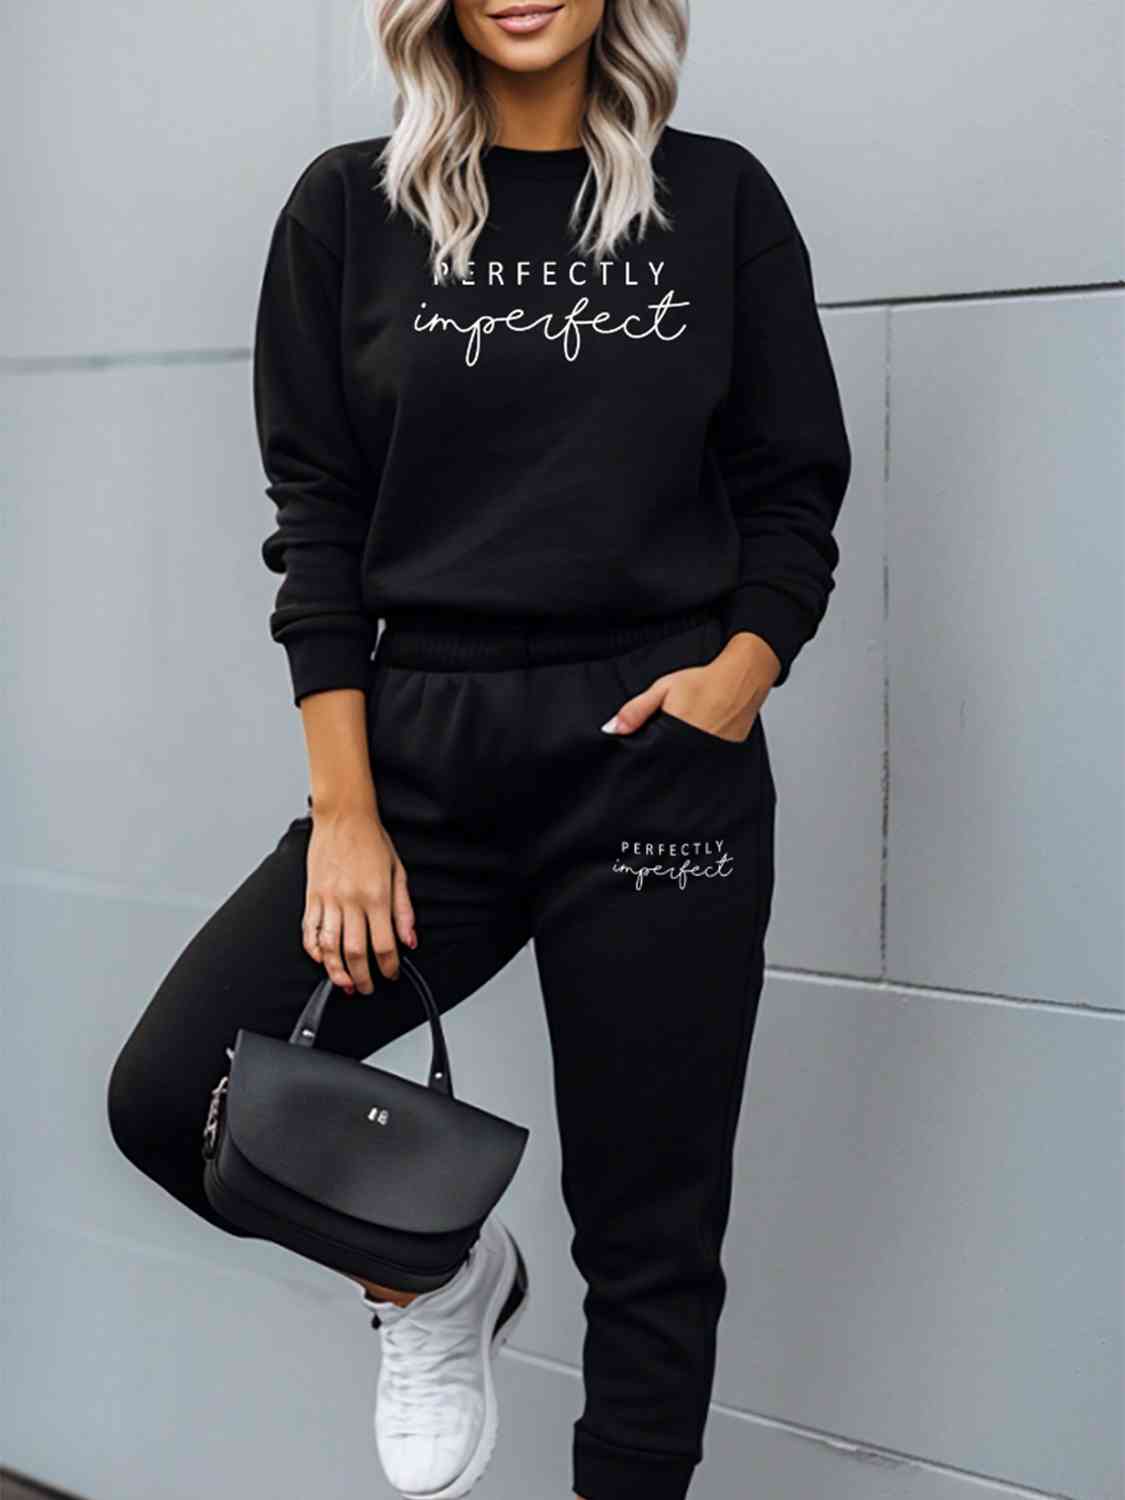 PERFECTLY IMPERFECT Graphic Sweatshirt and Sweatpants Set - Body By J'ne